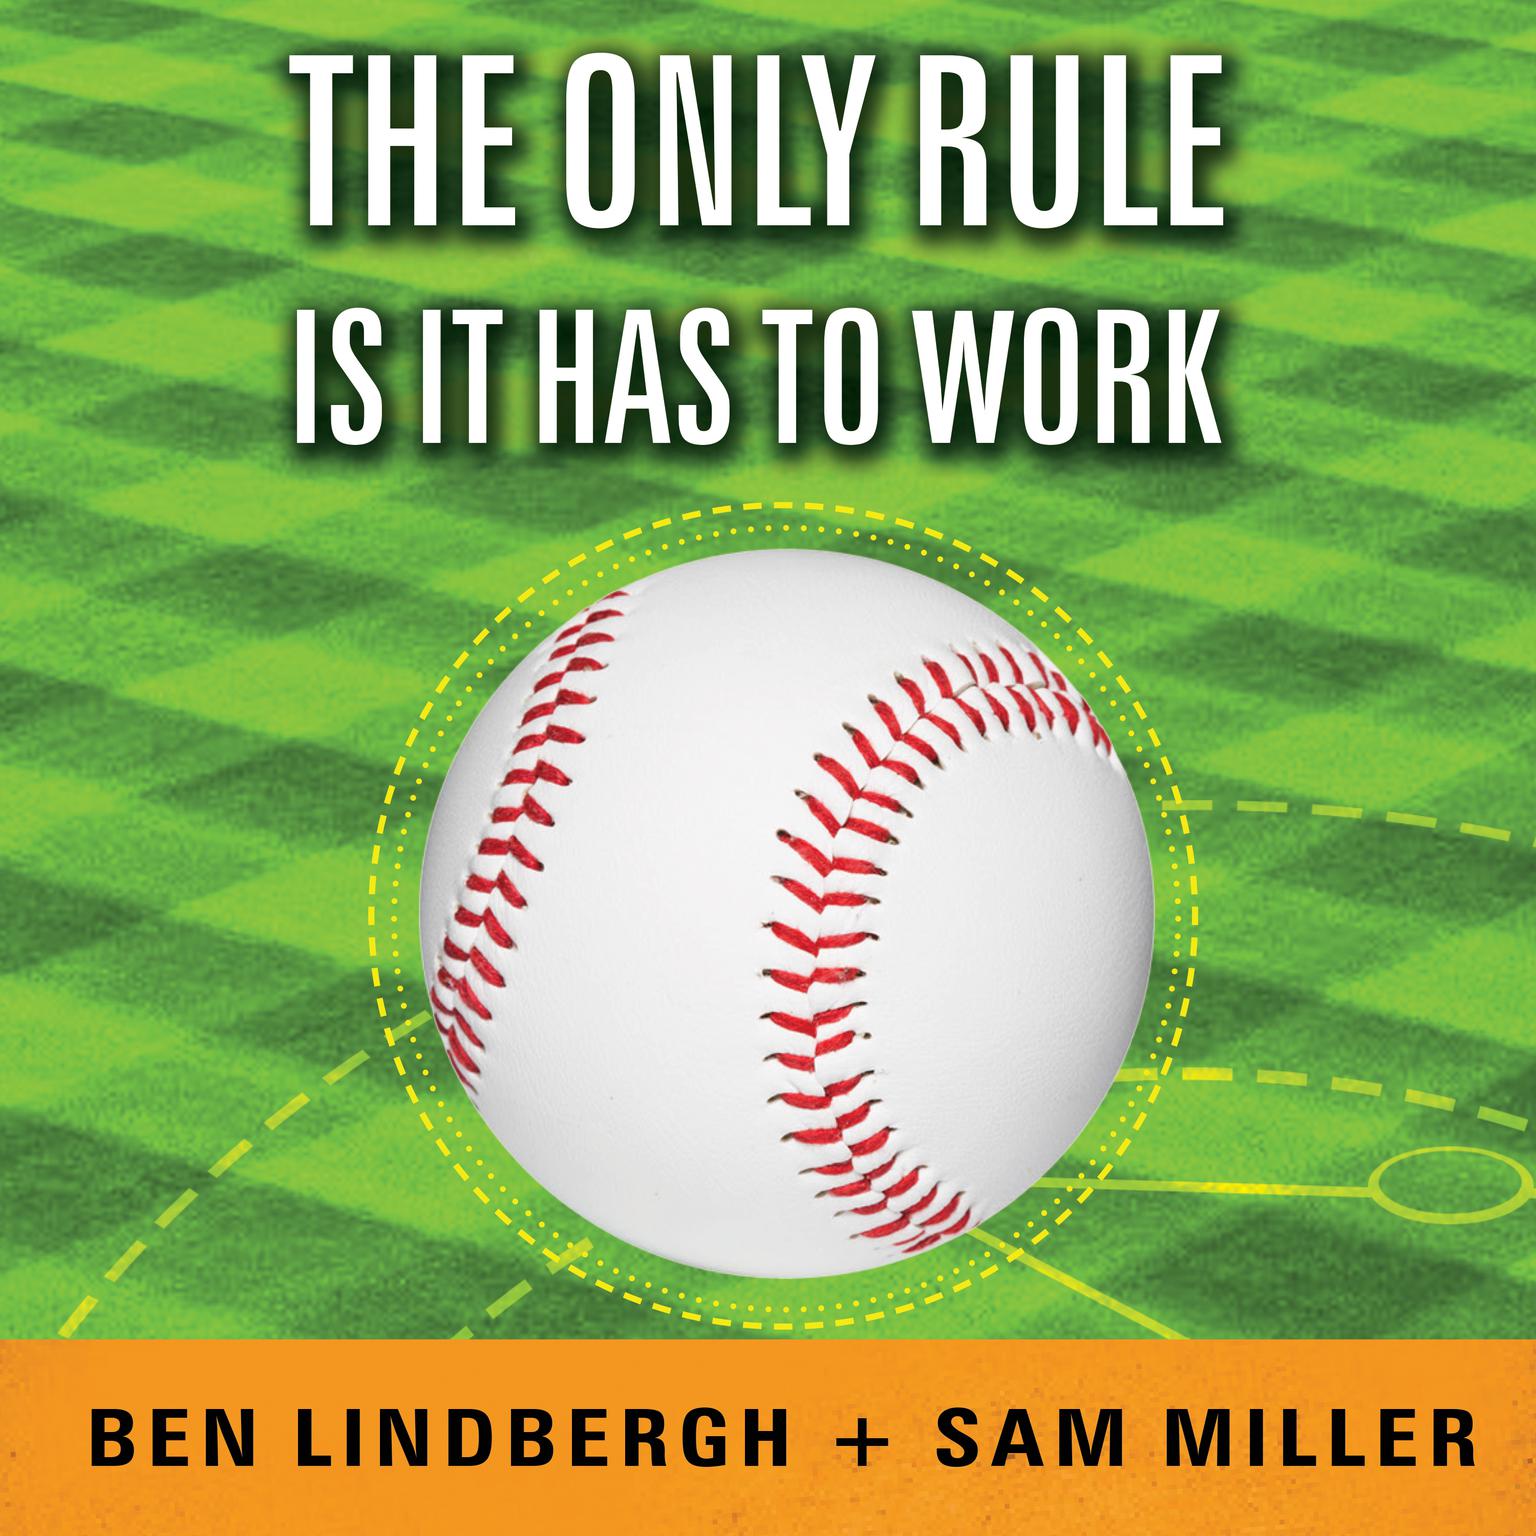 The Only Rule Is It Has to Work: Our Wild Experiment Building a New Kind of Baseball Team Audiobook, by Ben Lindbergh